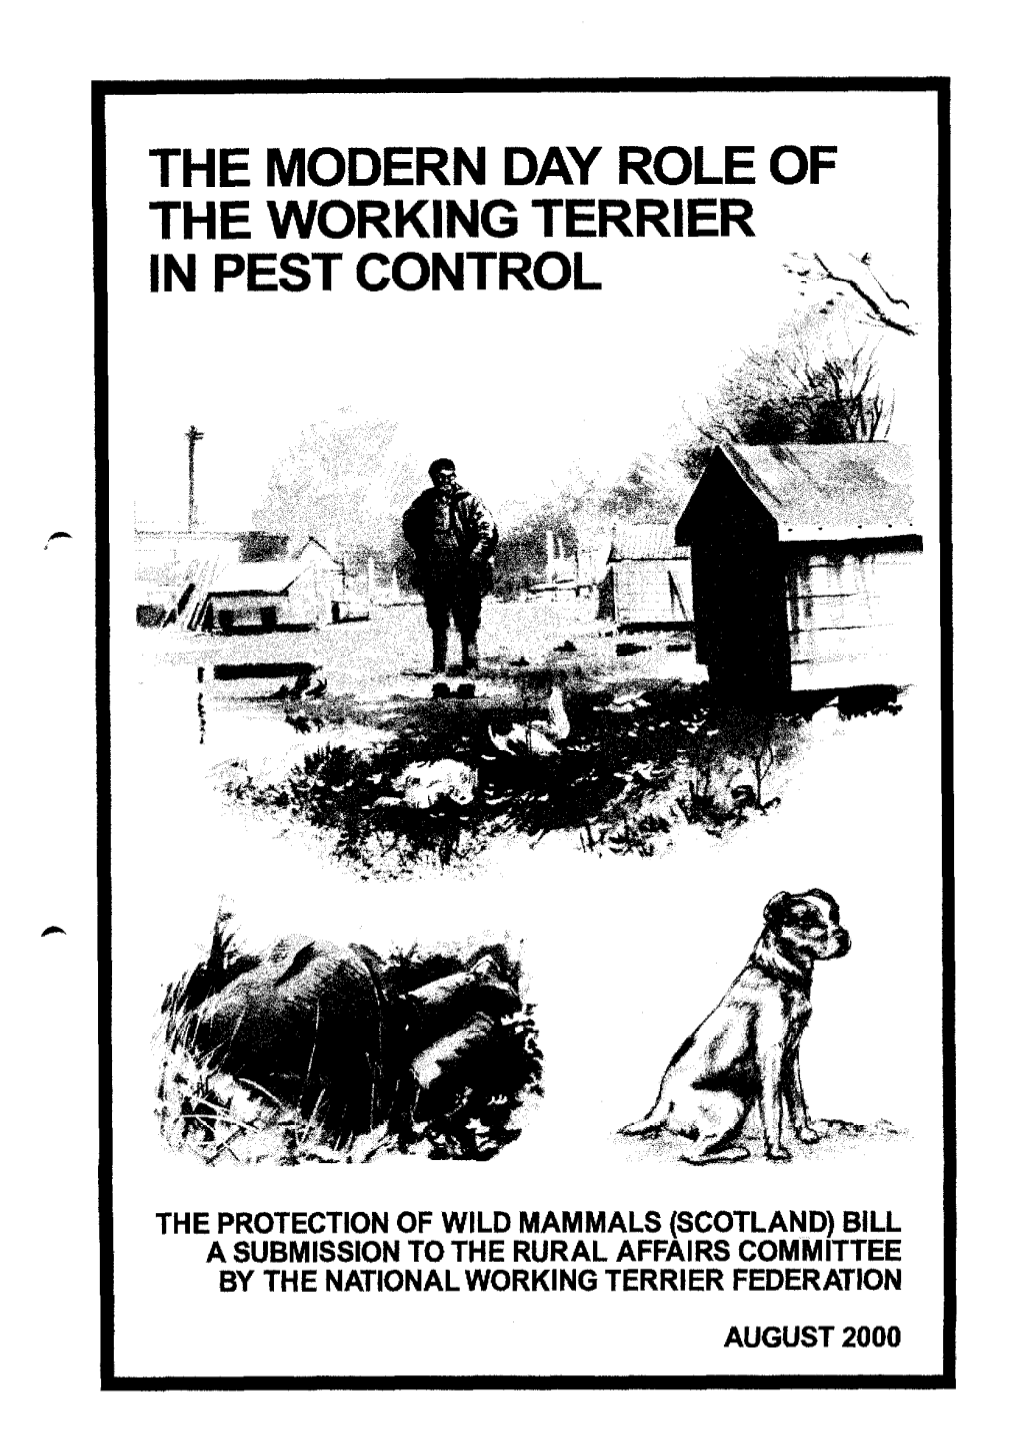 The Modern Day Role of the Working Terrier in Pest Control